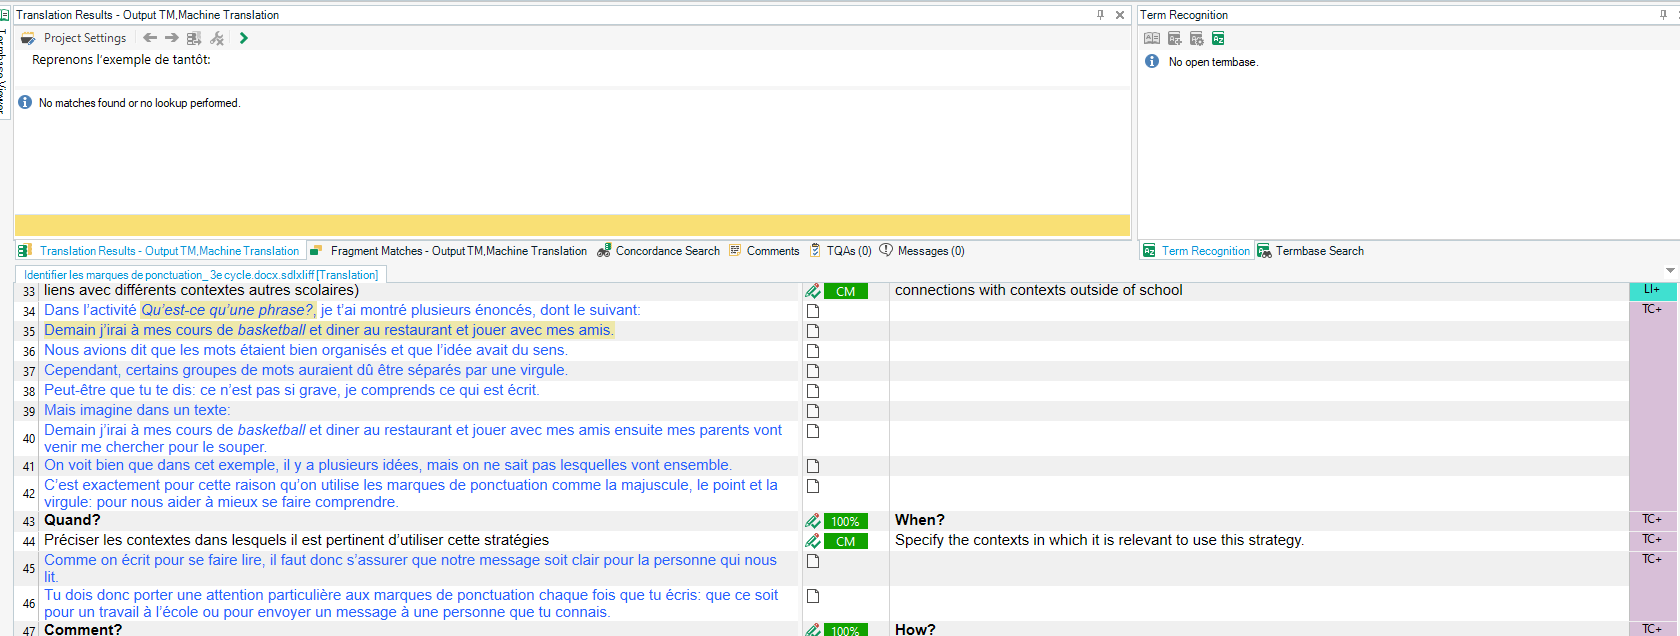 Trados Studio Editor view with a message 'No matches found or no lookup performed.' and a segment of text in French with corresponding translation in English on the right side.